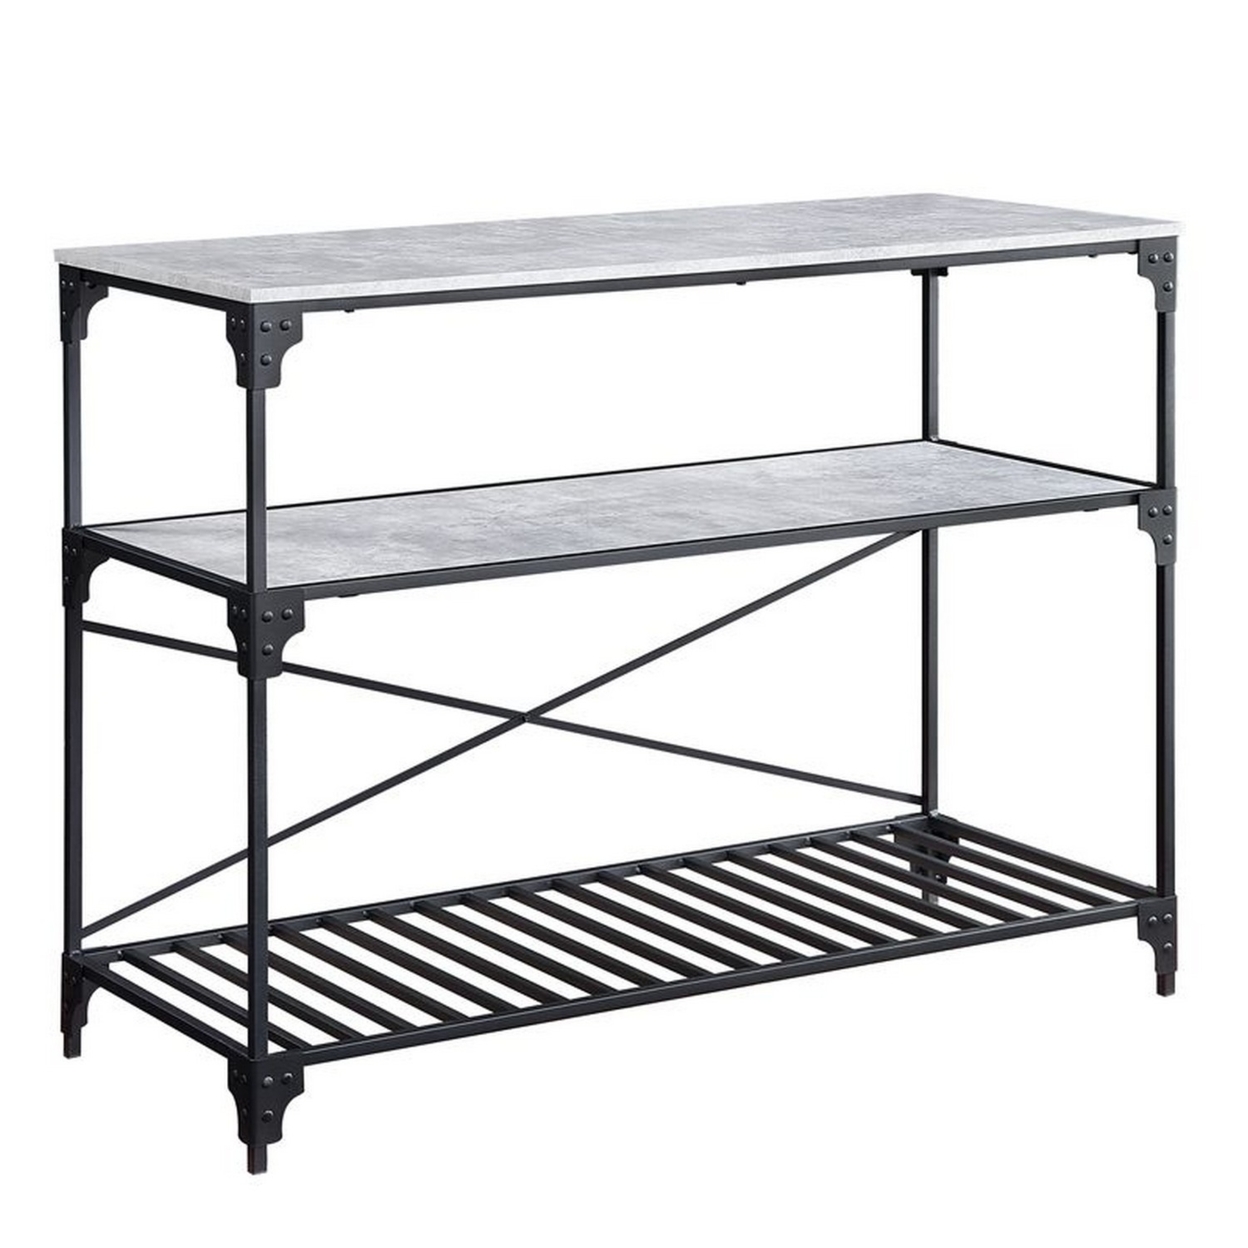 3 Tier Kitchen Island With Wooden And Slatted Shelves, Gray- Saltoro Sherpi